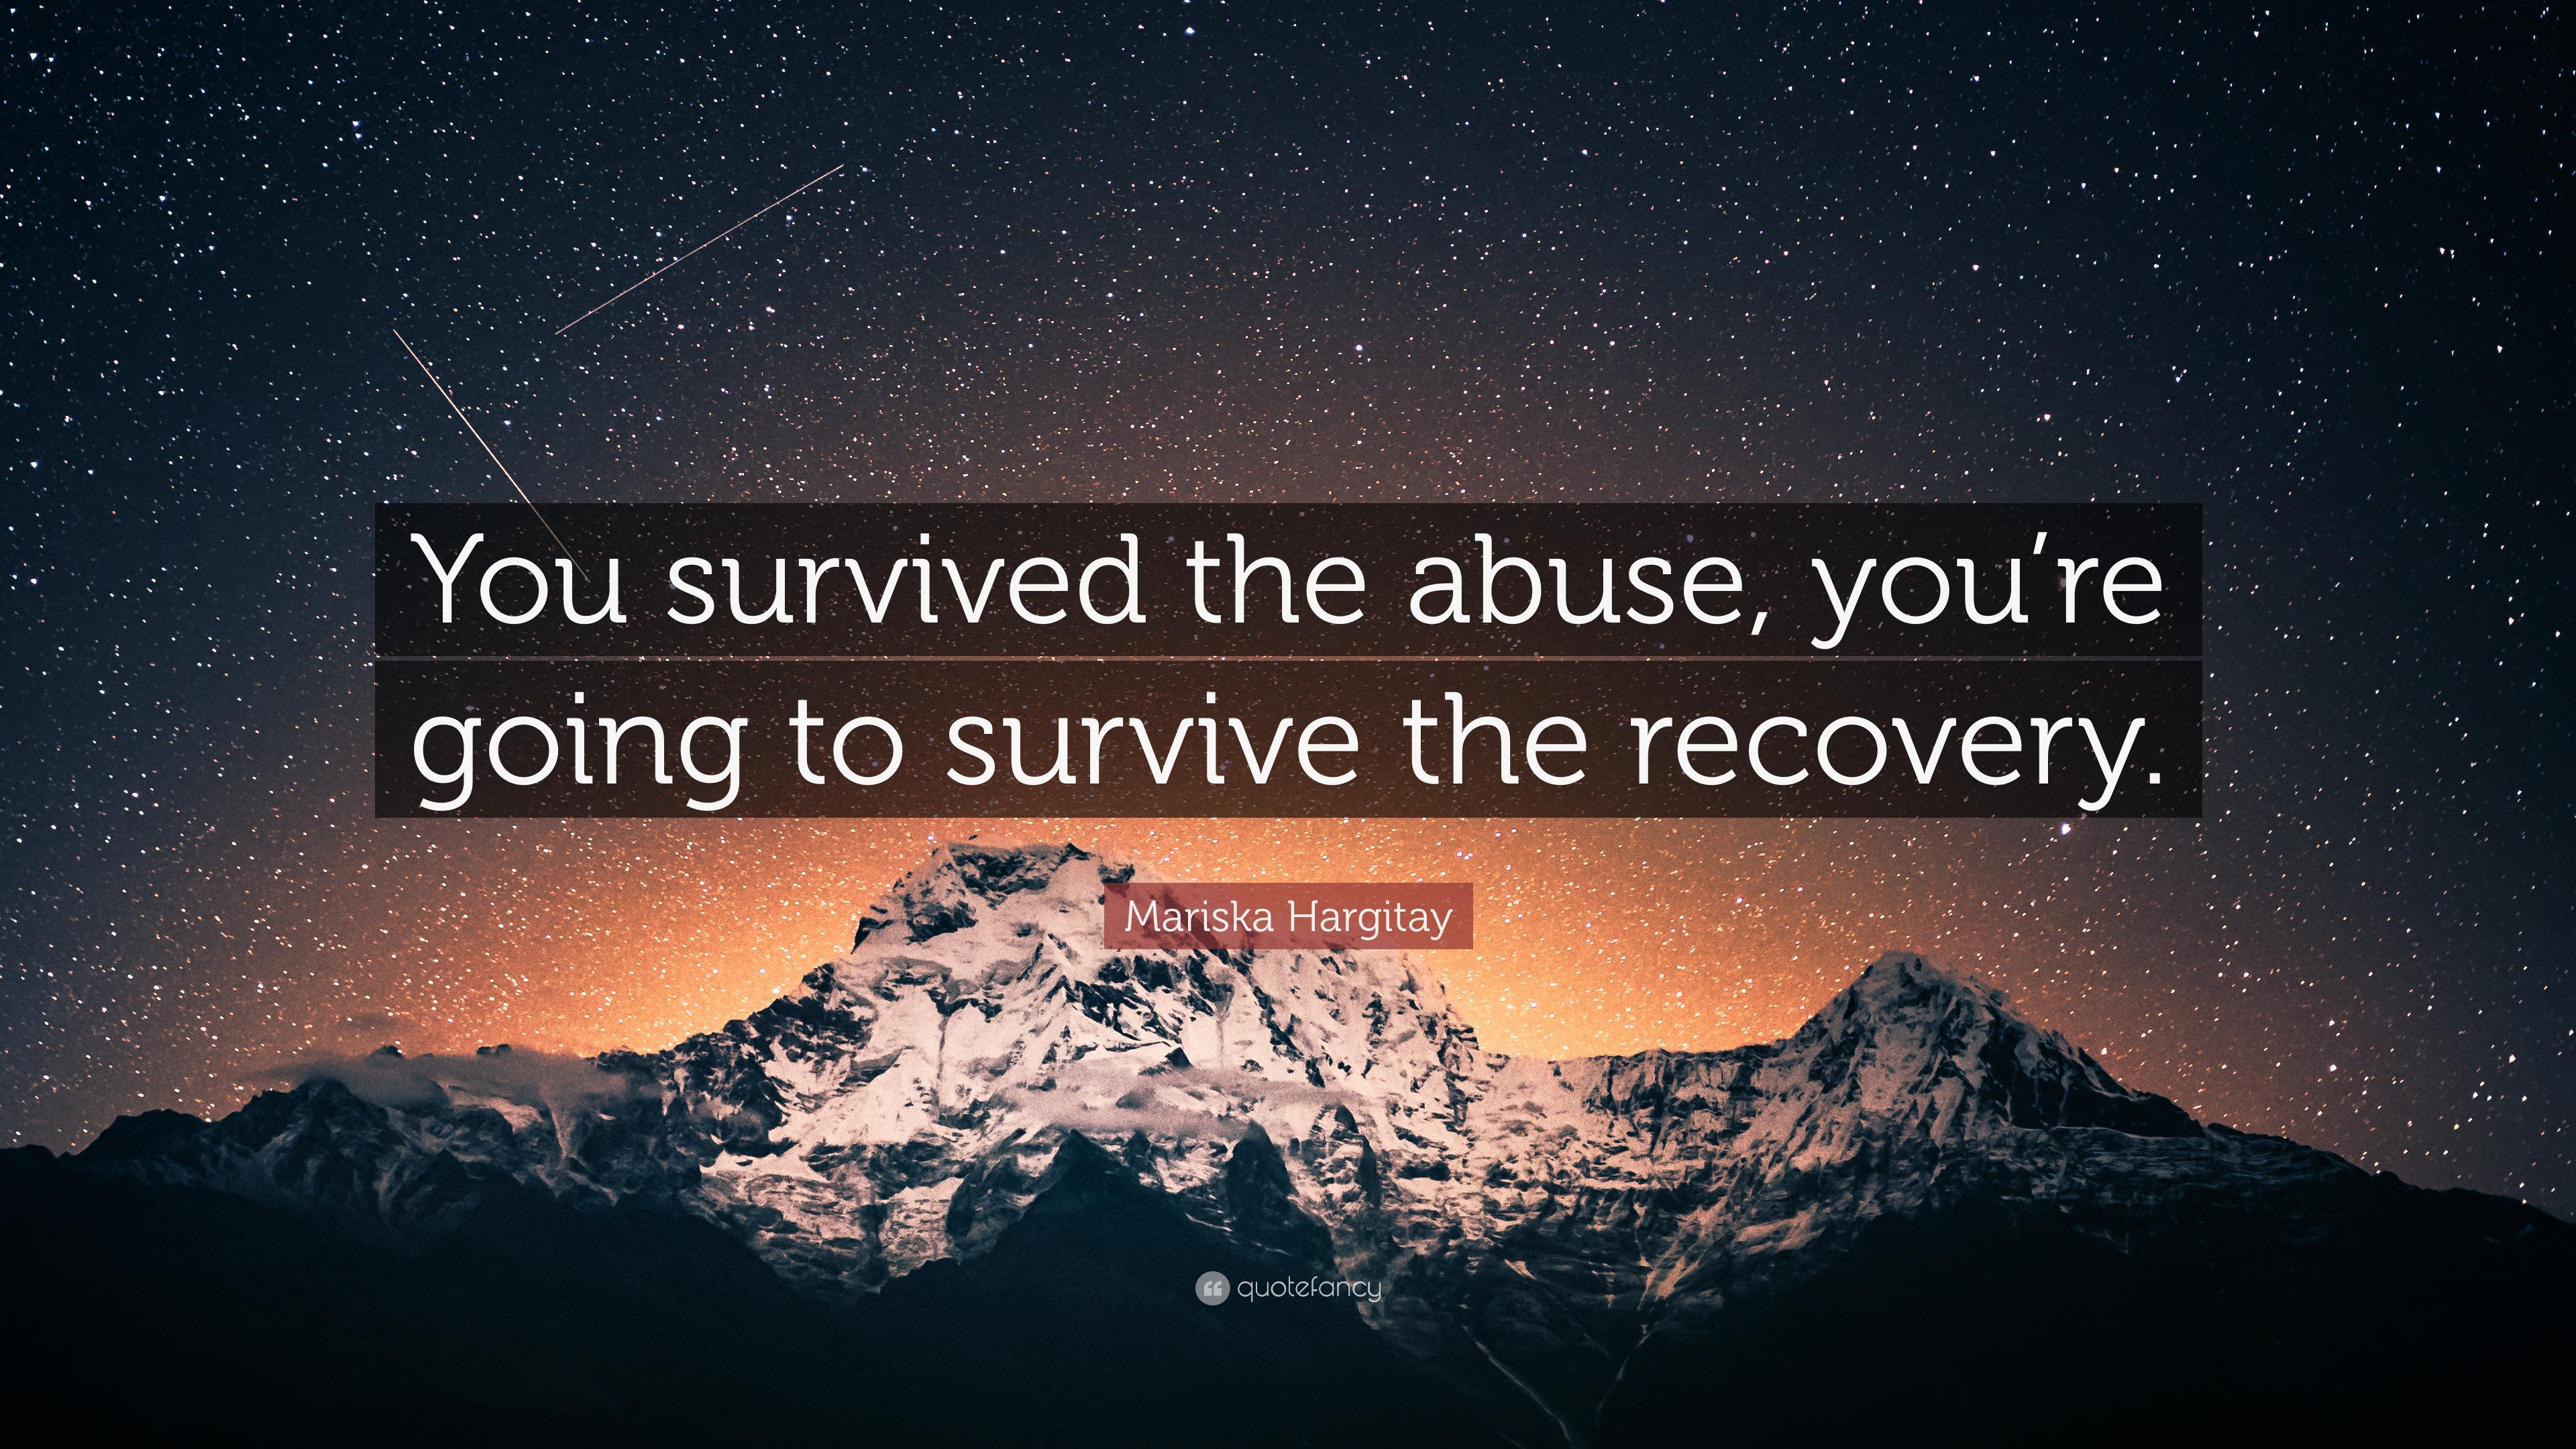 Mariska Hargitay Quote: “You survived the abuse, you're going to